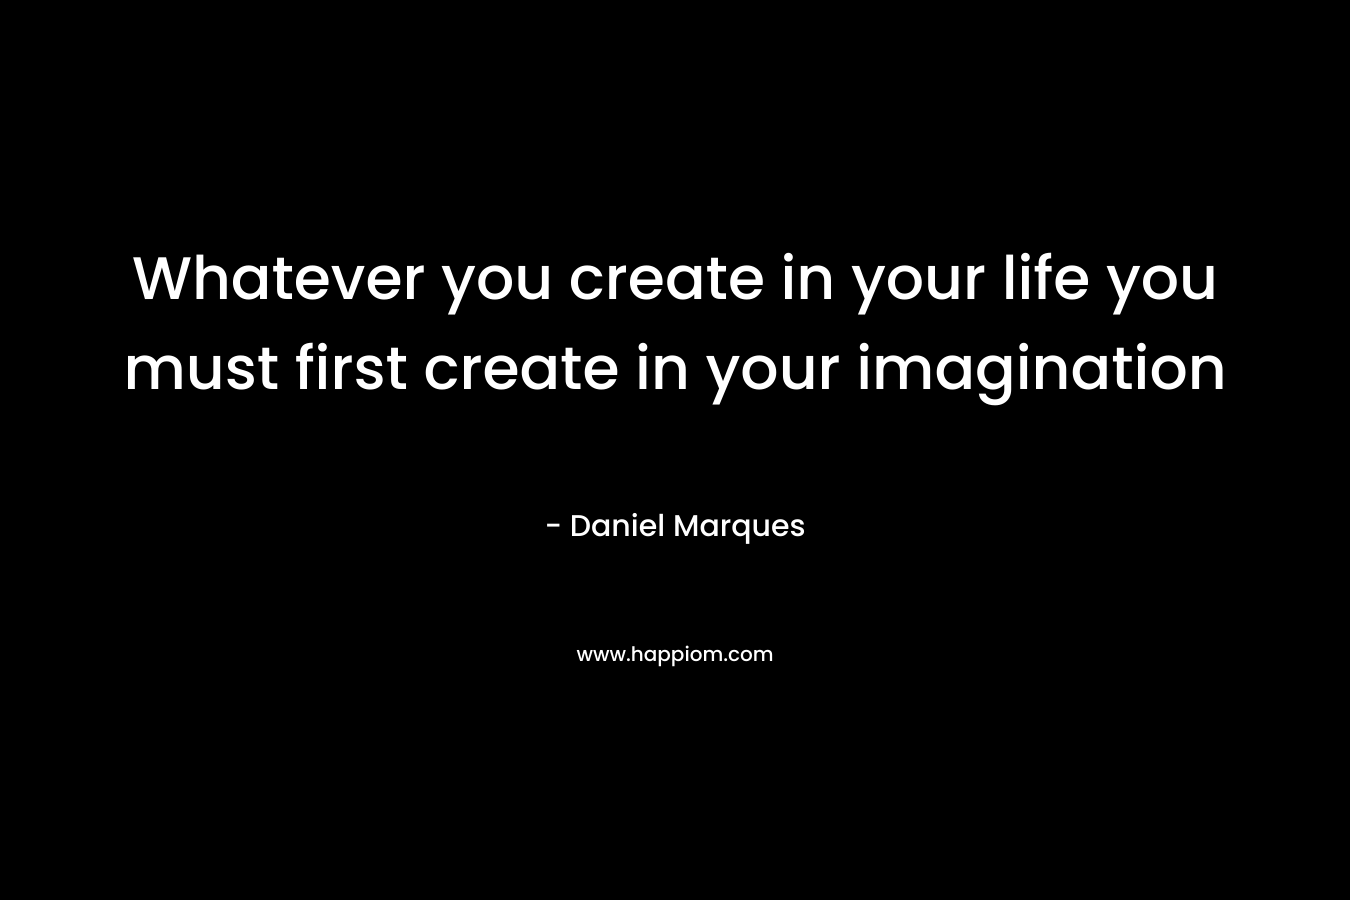 Whatever you create in your life you must first create in your imagination